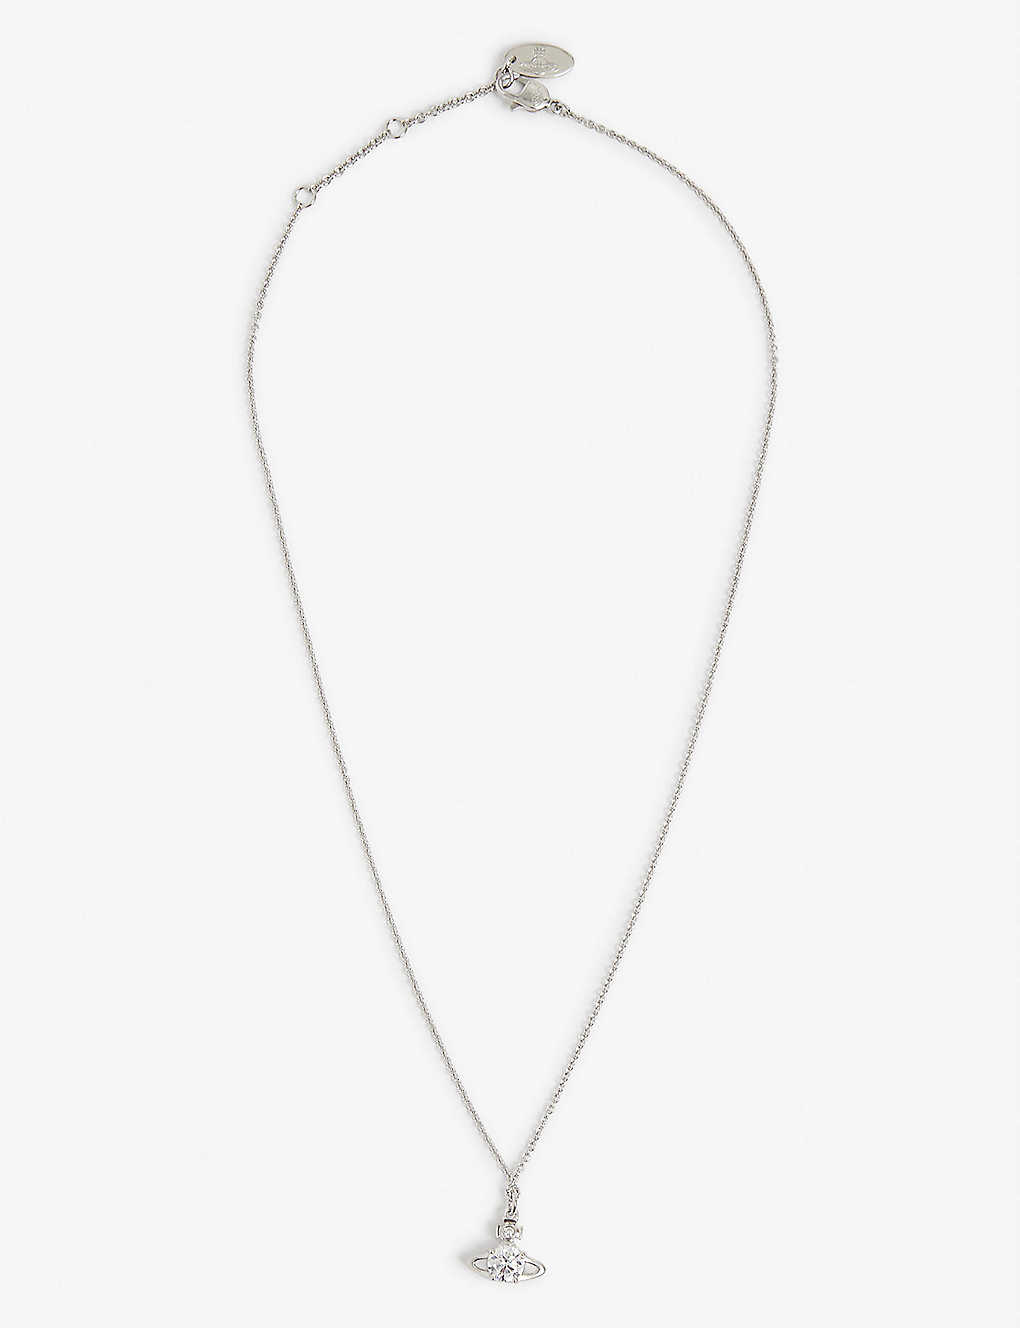 Vivienne Westwood Jewellery Reina Orb Brass And Cubic Zirconia Pendant Necklace In Silver/white